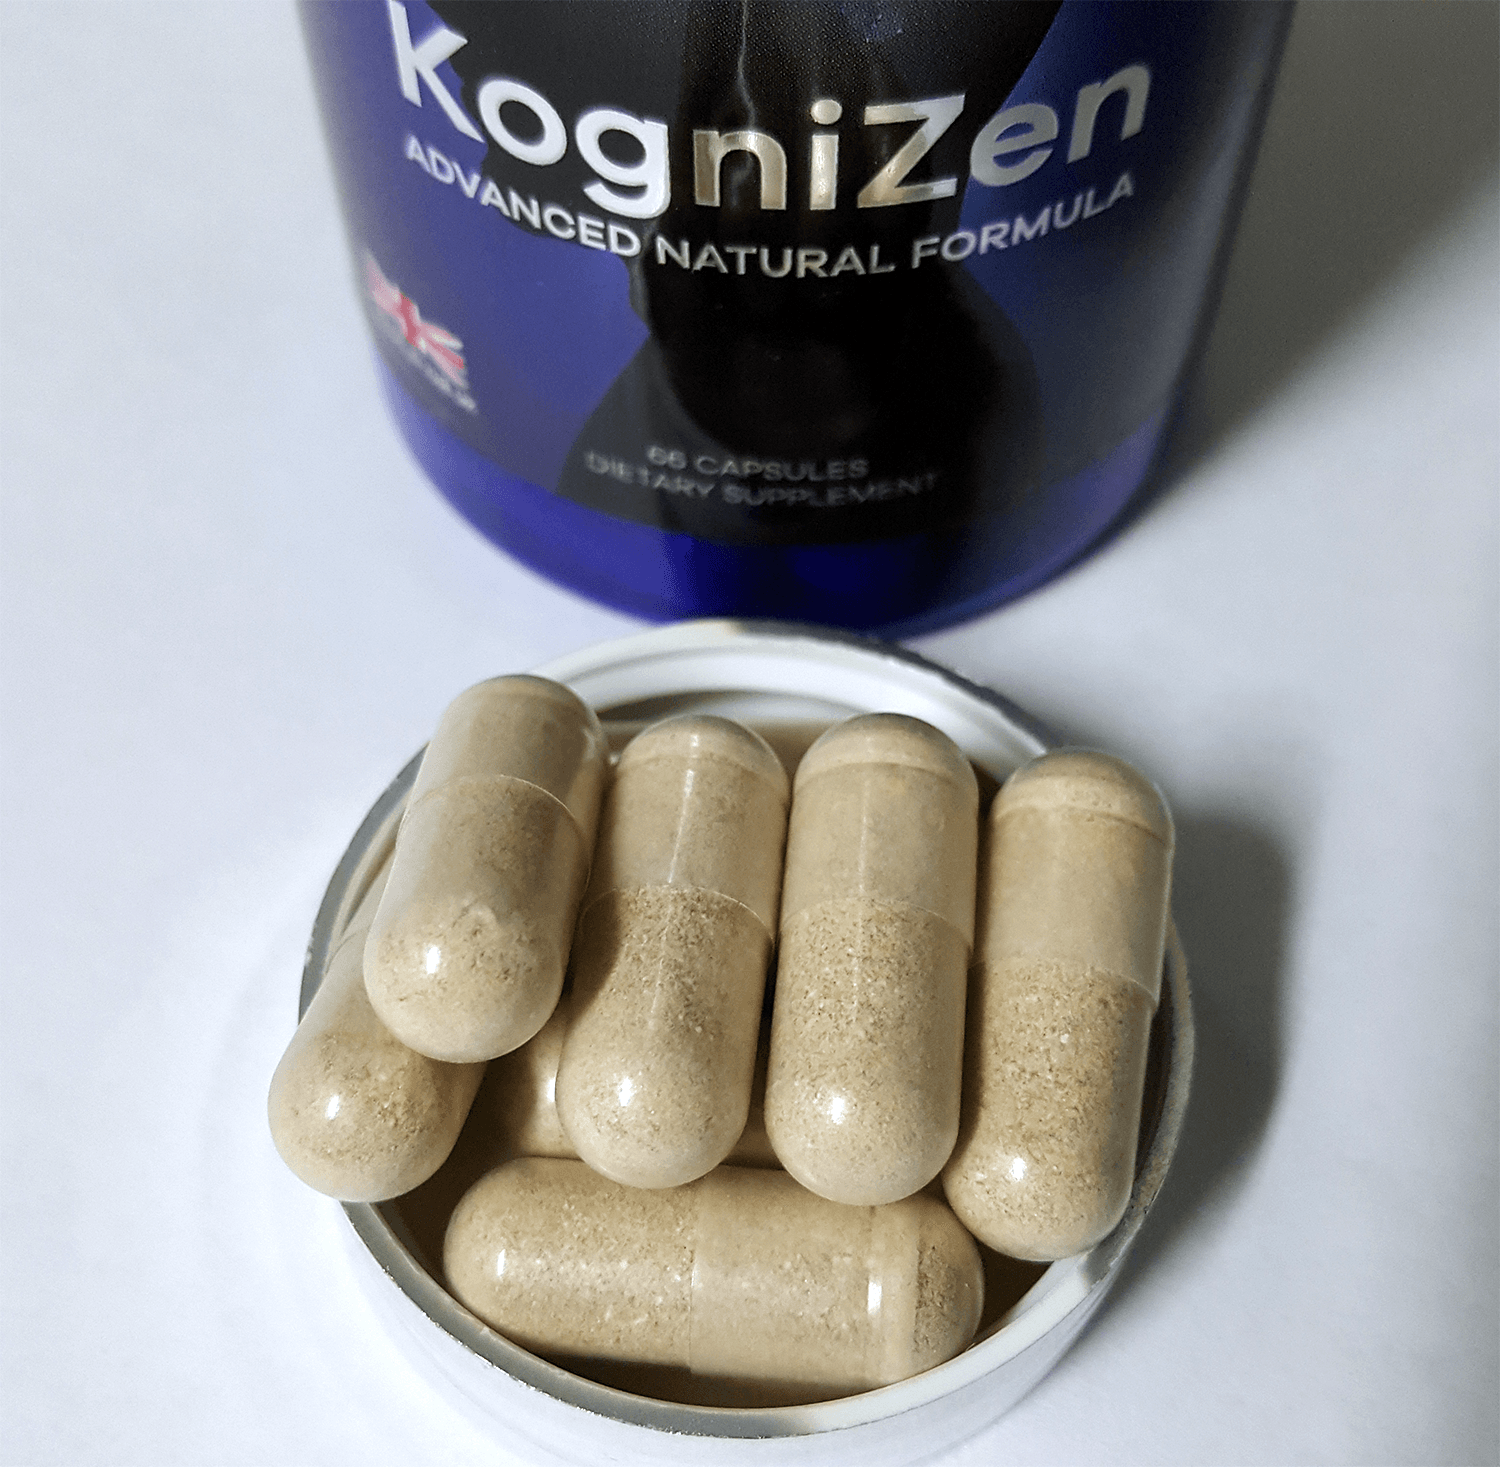 KogniZen capsules featuring a yellow color